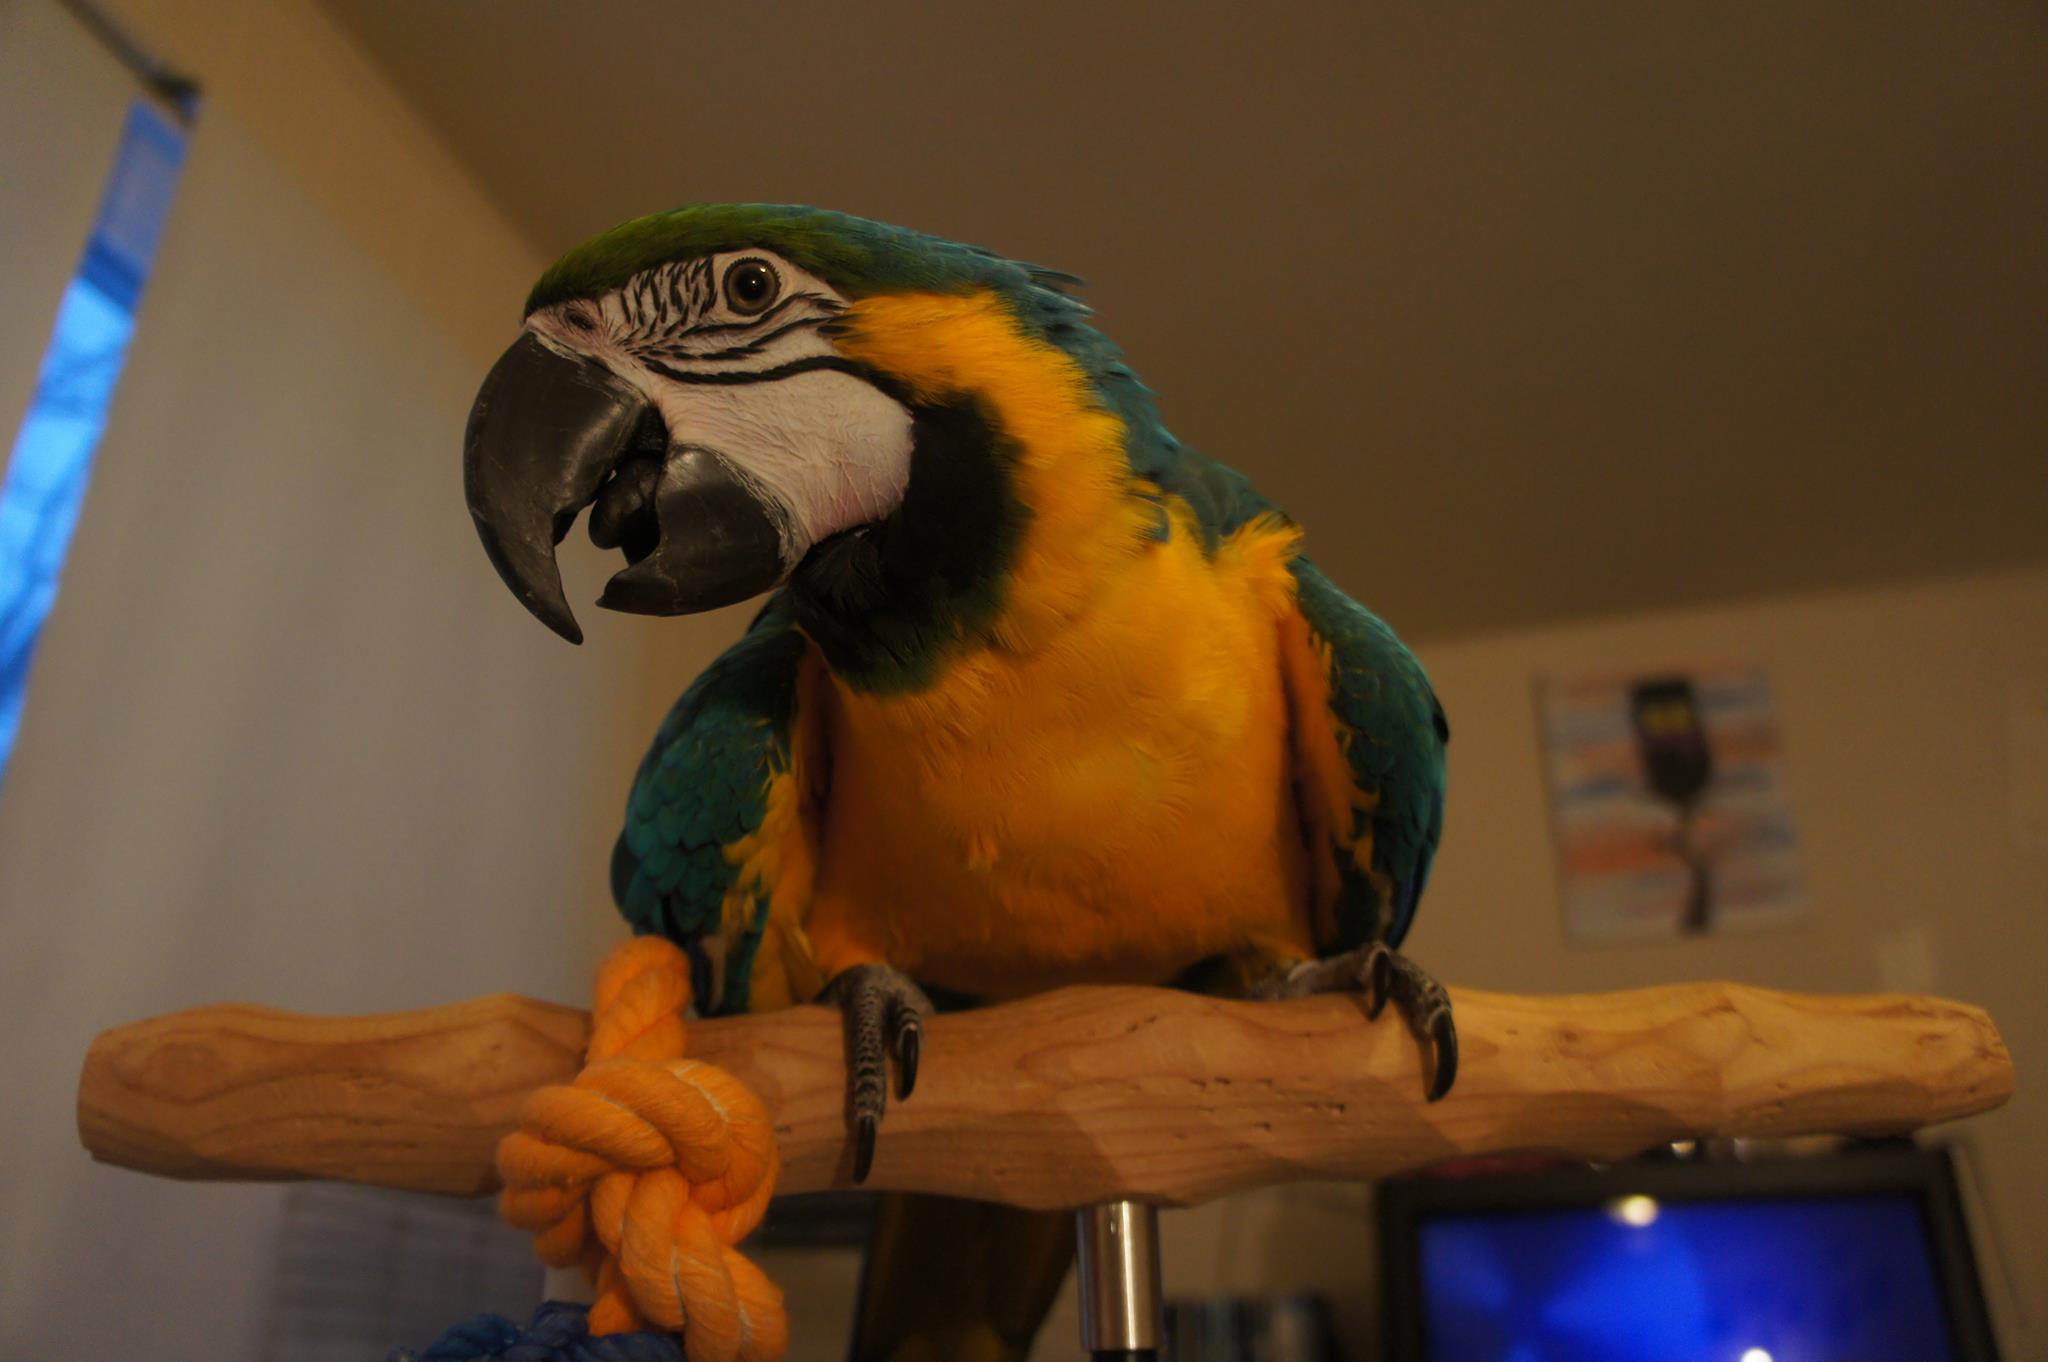 Image of a parrot.